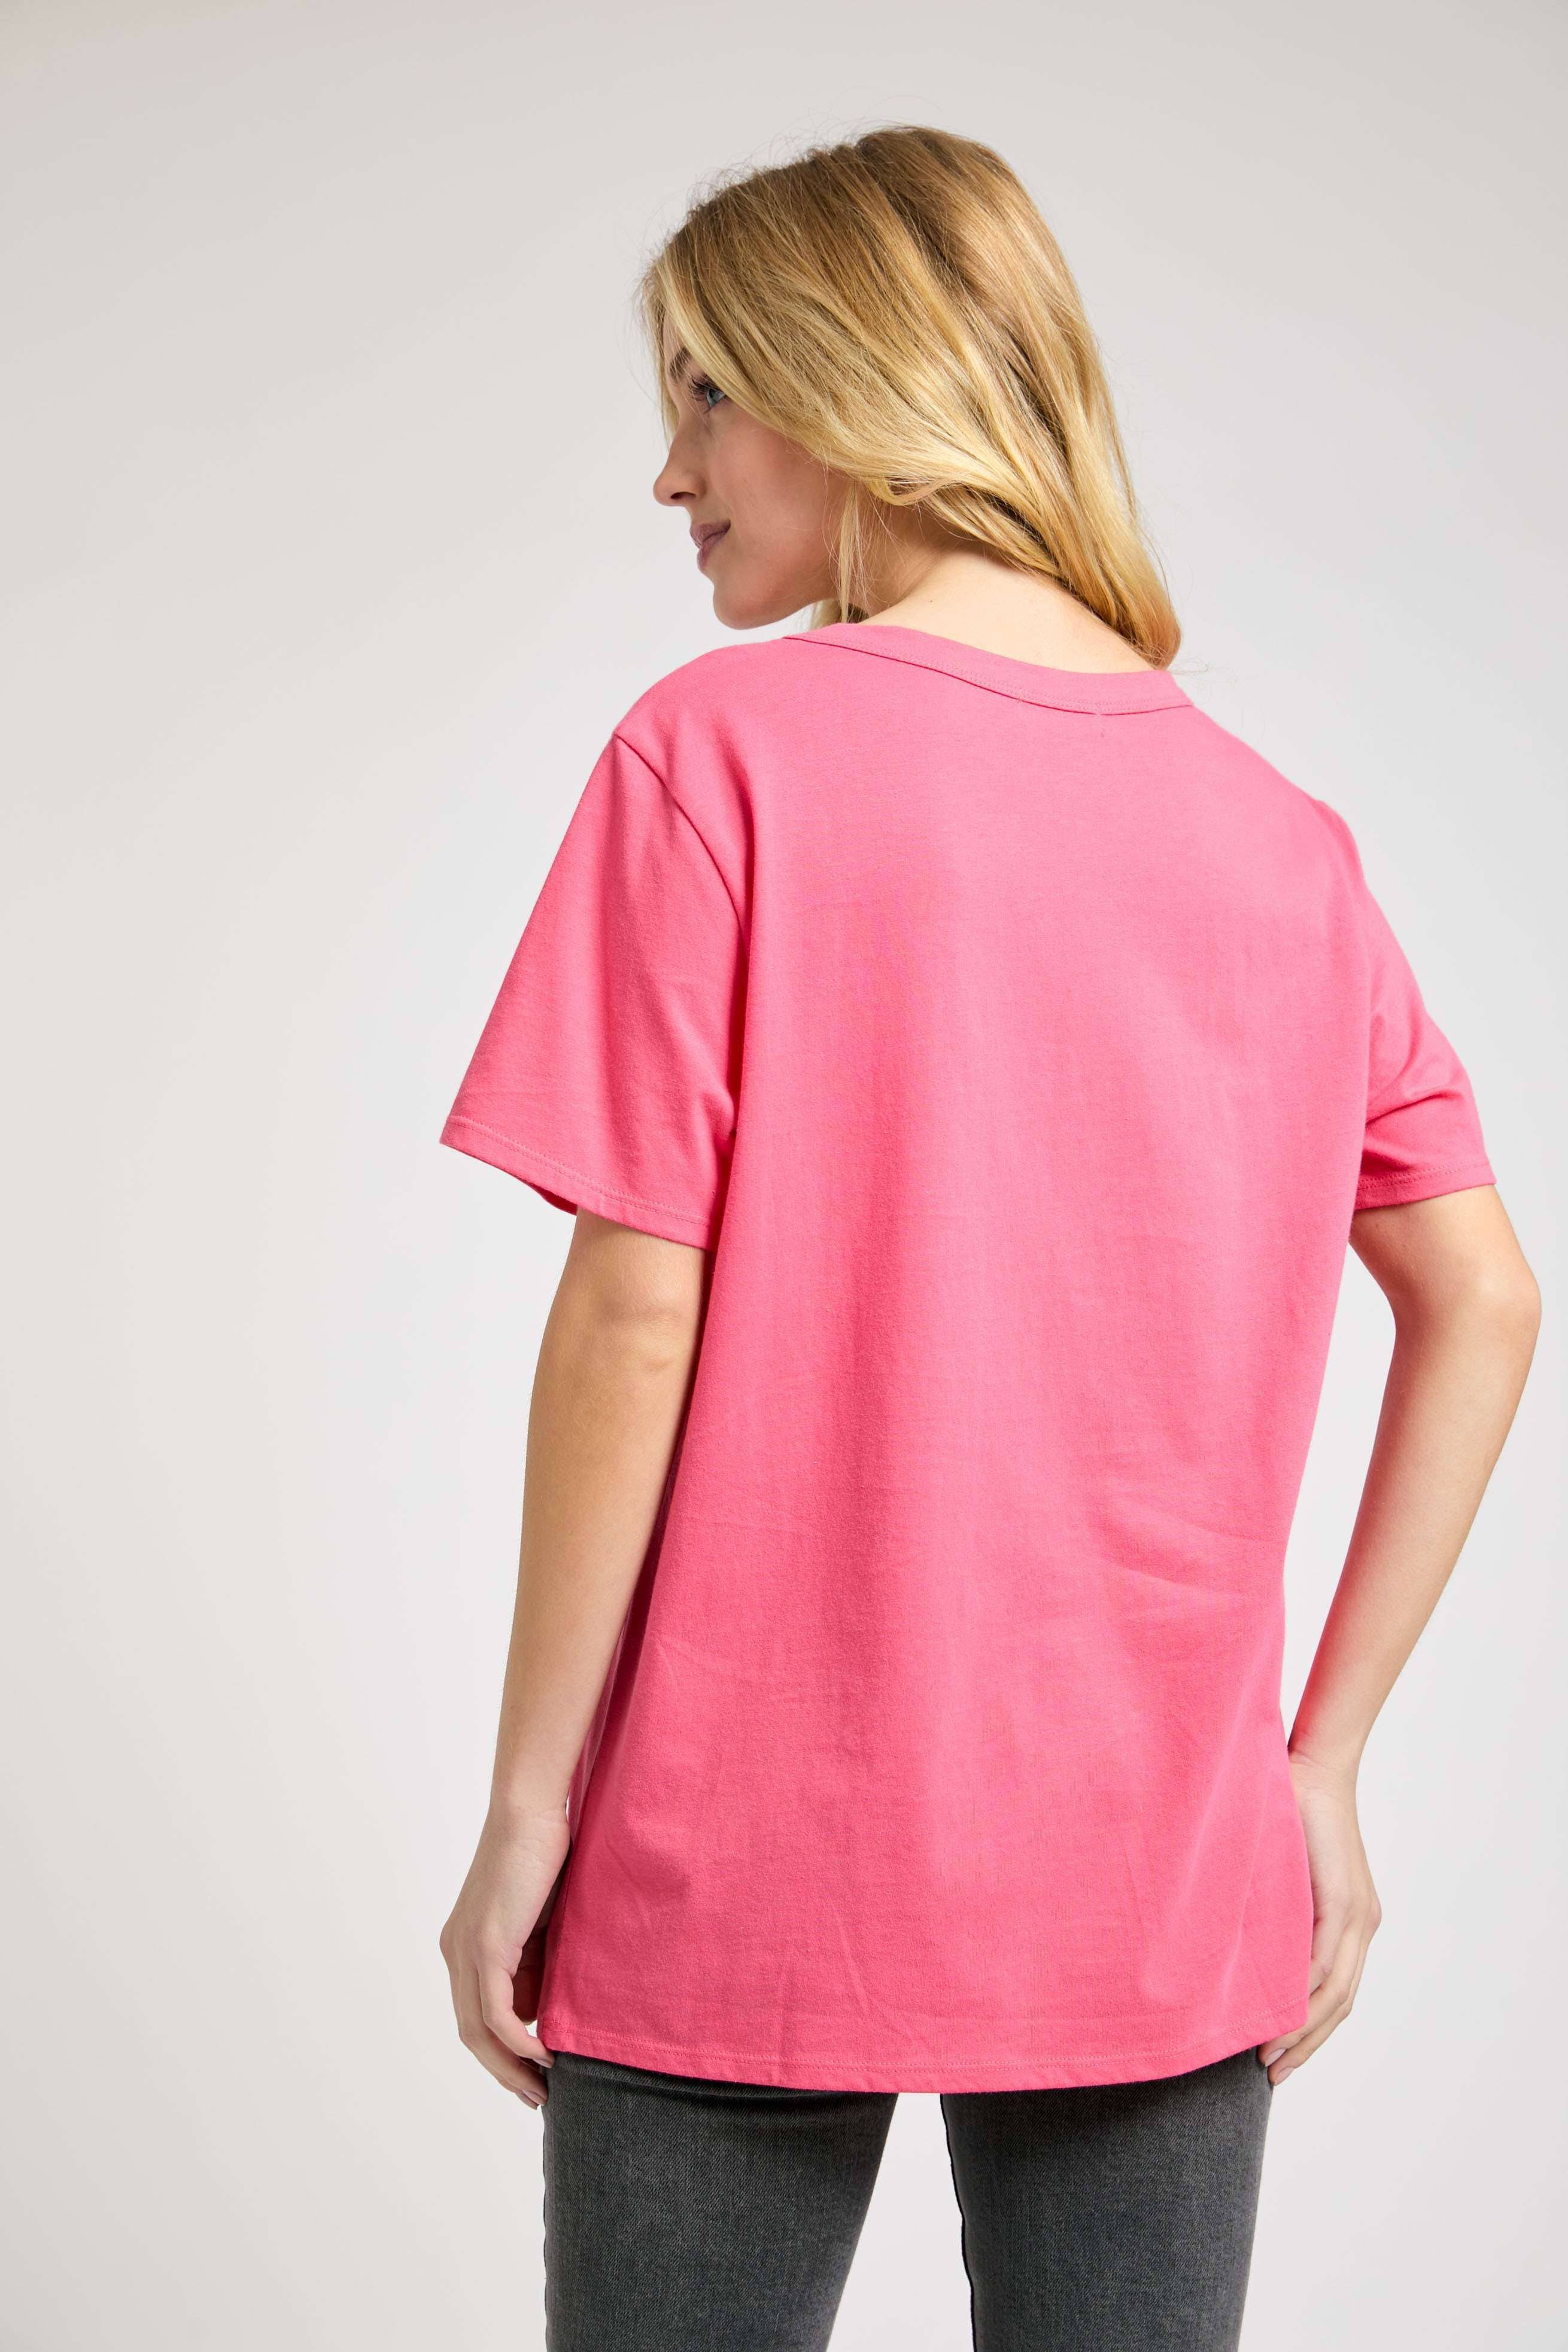 Oversized Coral Tee